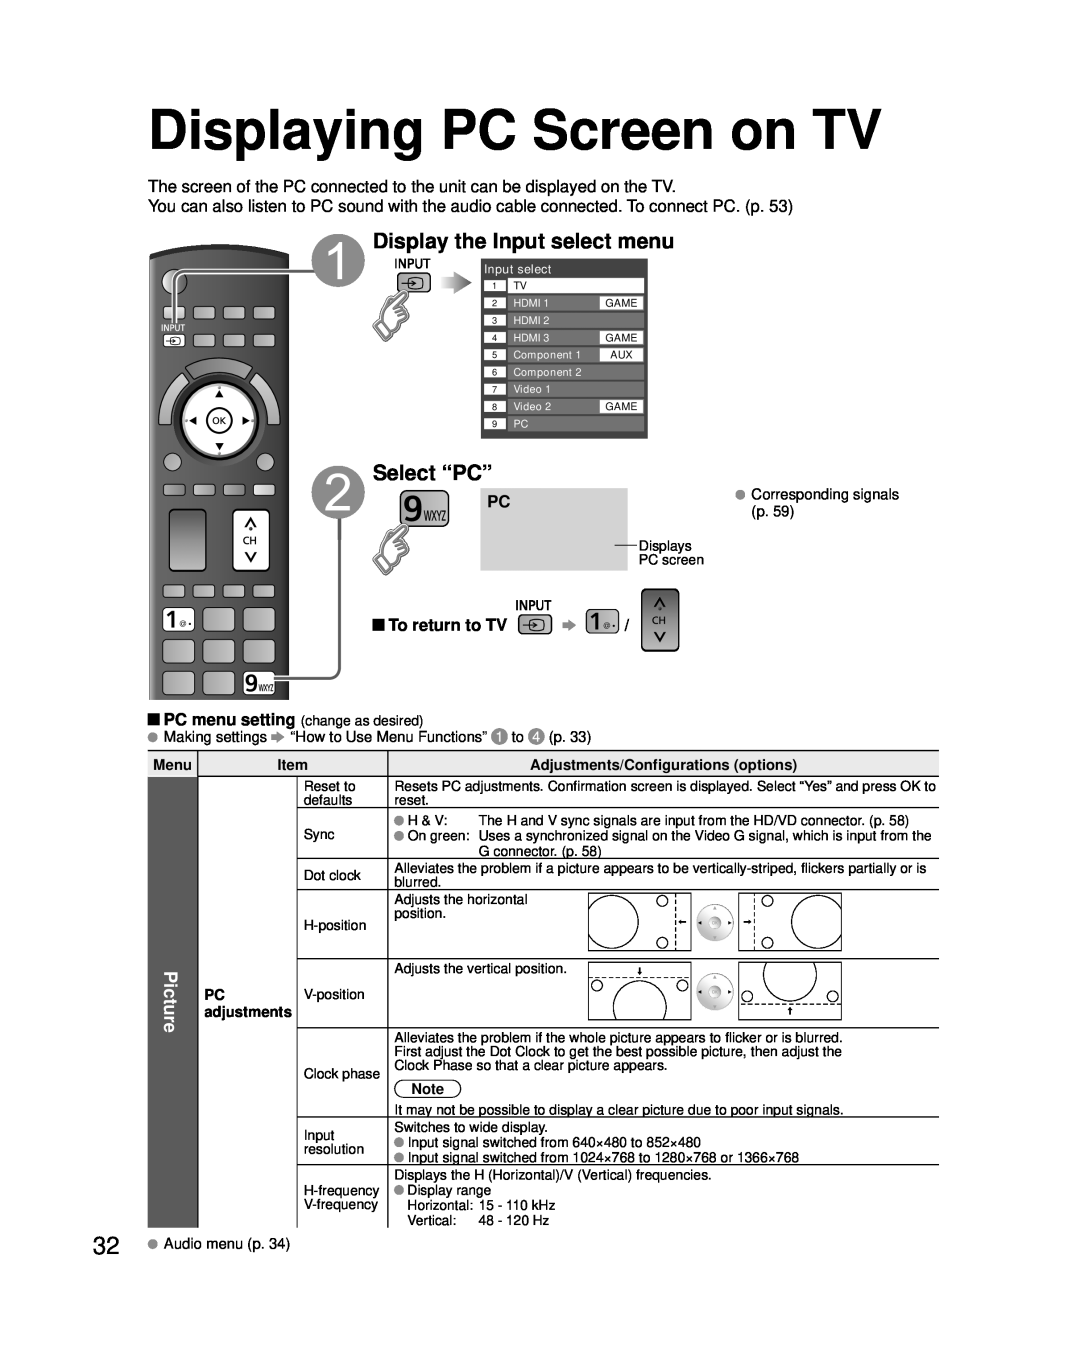 Panasonic TC-P42G25 Displaying PC Screen on TV, Picture, To return to TV, Menu, Adjustments/Configurations options 